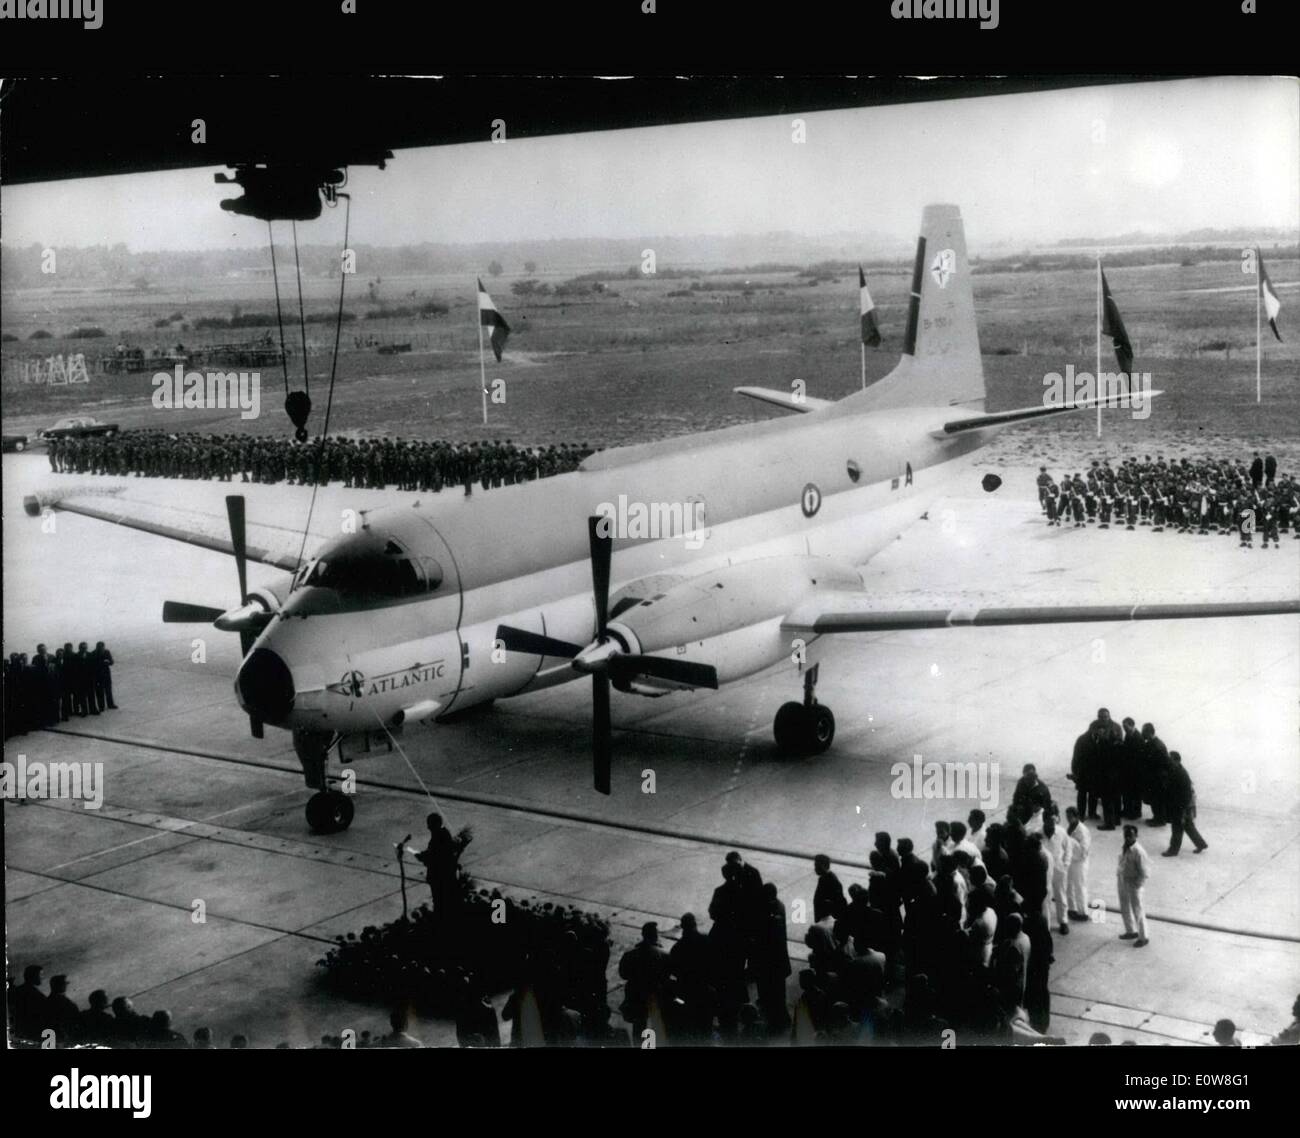 Nov. 11, 1961 - Atlantic'' - NATO's new plane presented at Toulouse: Atlantic, NATO's new plane chiefly intended for reconnaissance and anti-submarine missions was presented to the press to Toulouse colomiers yesterday. The new 40-ton plane has flight capacity of 12 to 18 hours, a Maximum speed of 615 kilometers p.h. and its field of action exceeds 9.000 kilometers. It was constructed by Breguet in collaboration with NATO countries firms. Photo shows Atlantic pictured during the demonstration at Toulouse yesterday. Stock Photo